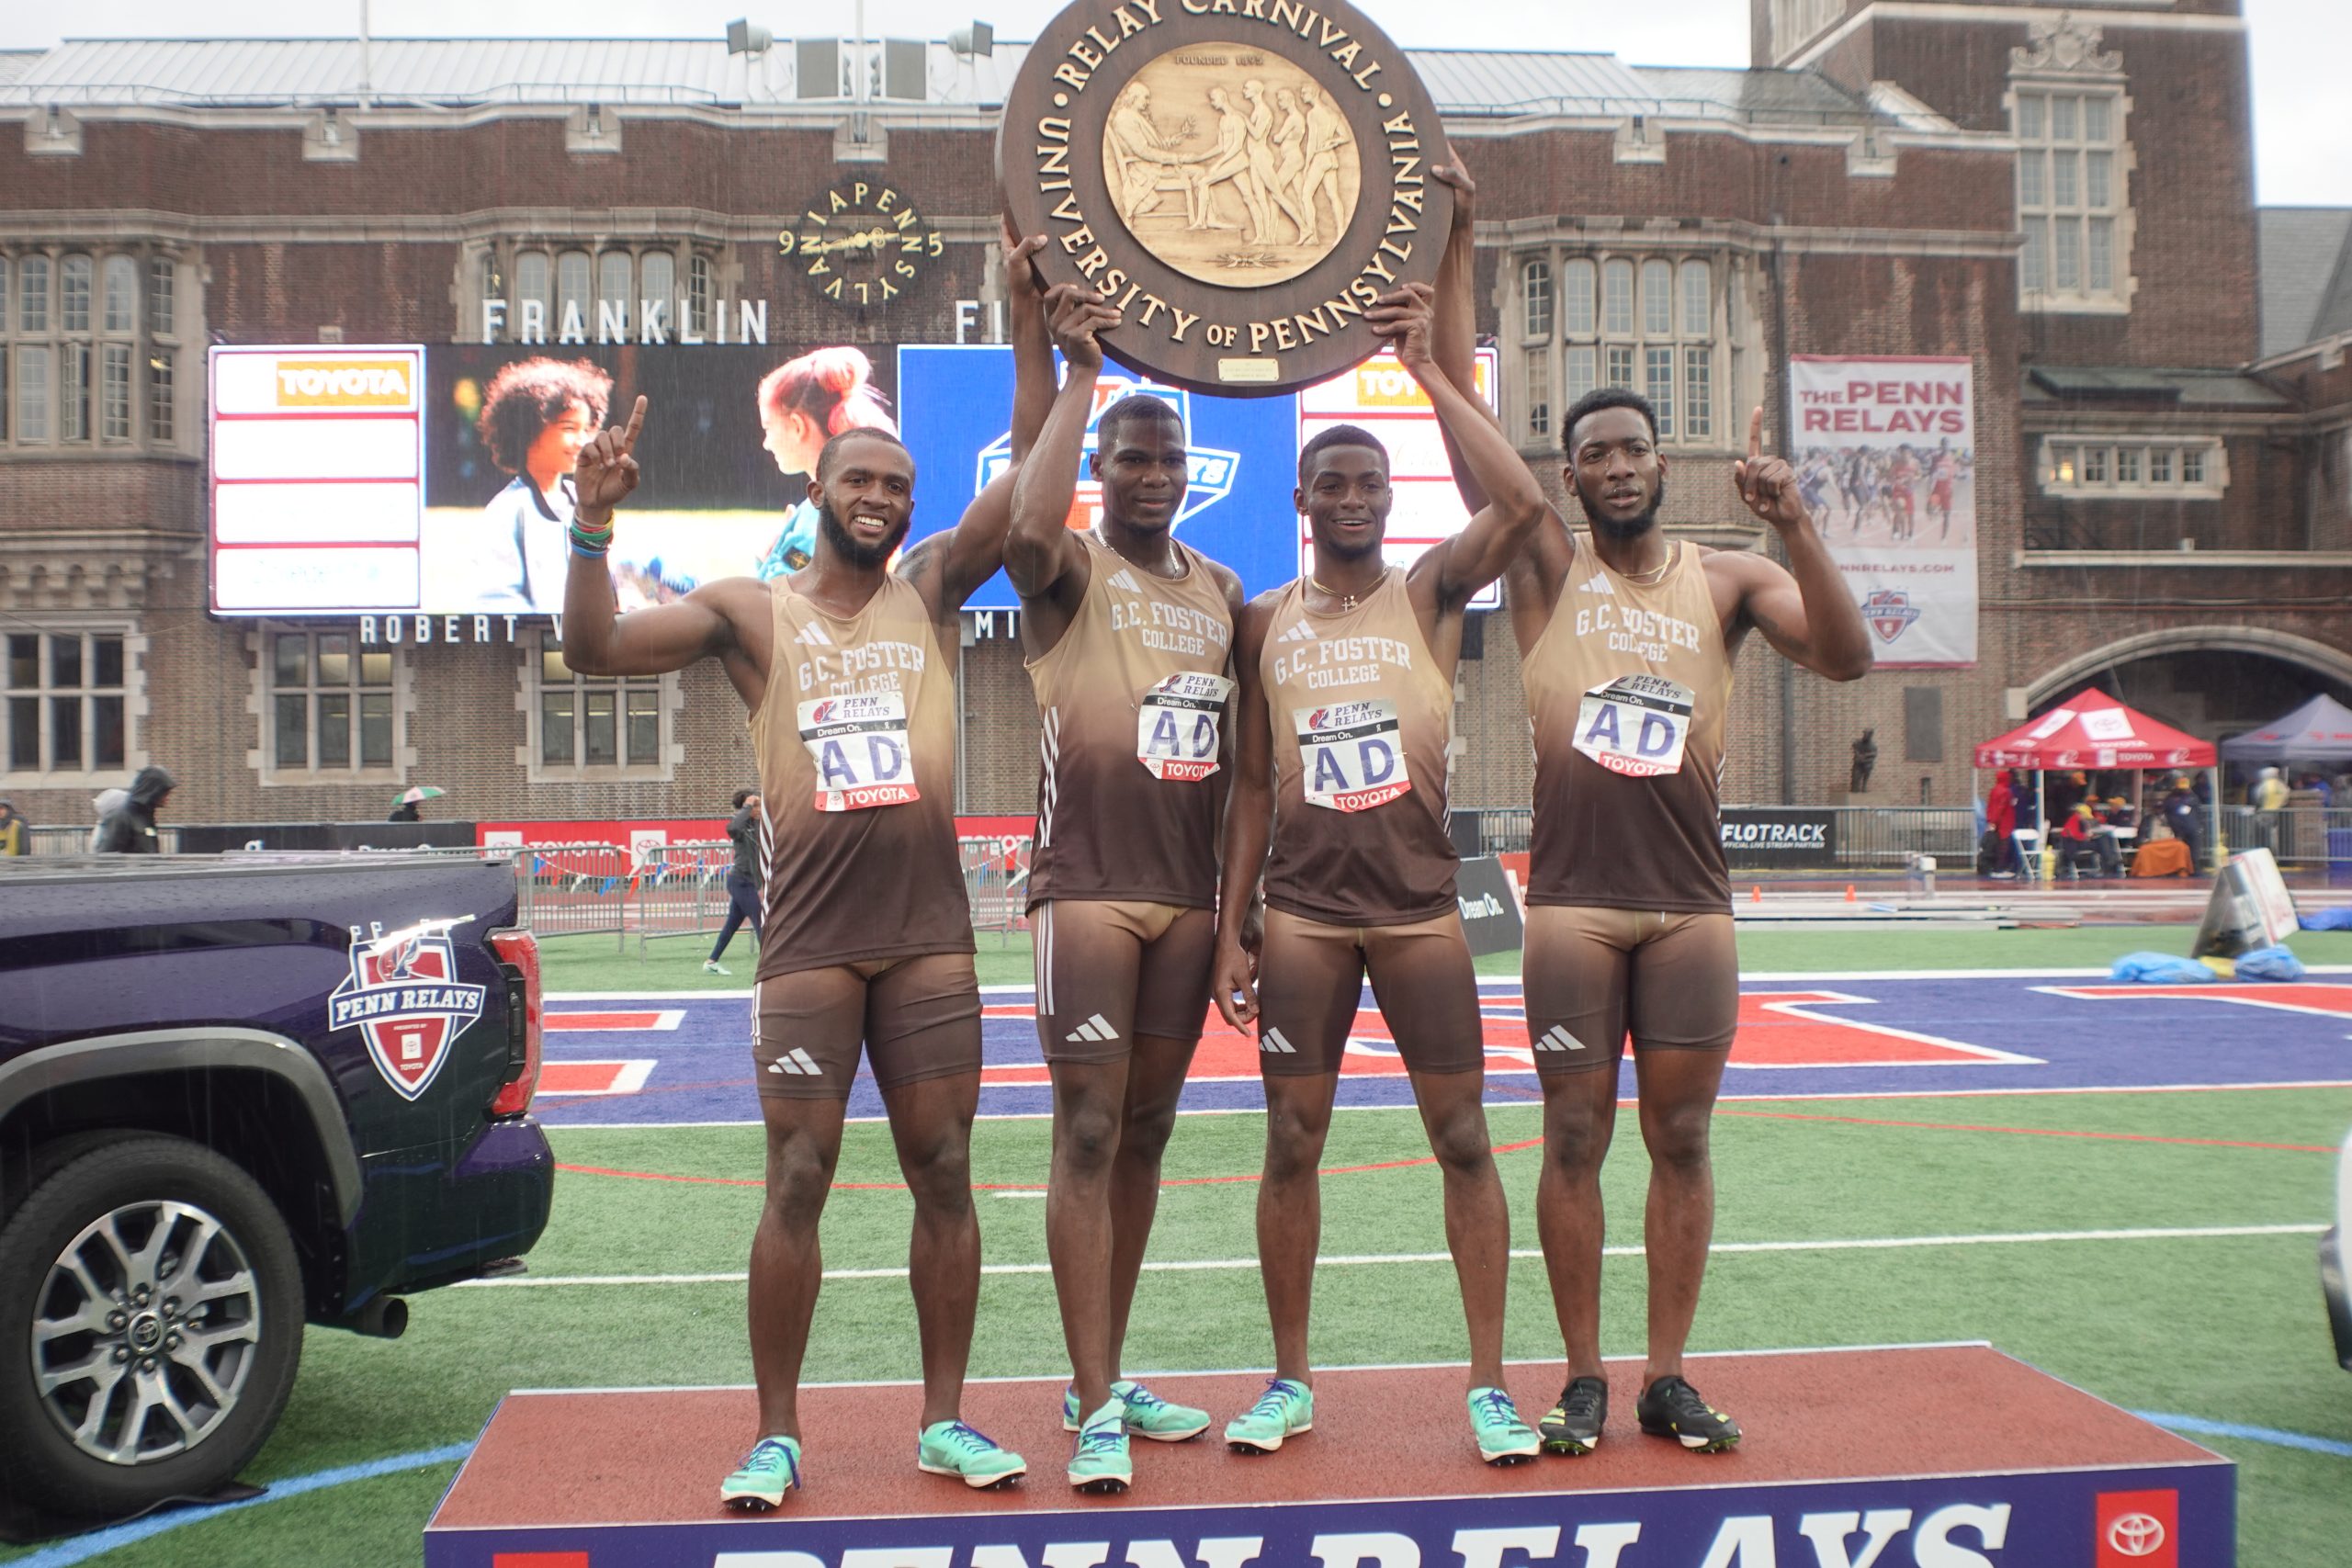 GC Foster College Secures Gold in College Men's 4x200 Championship at Penn Relays